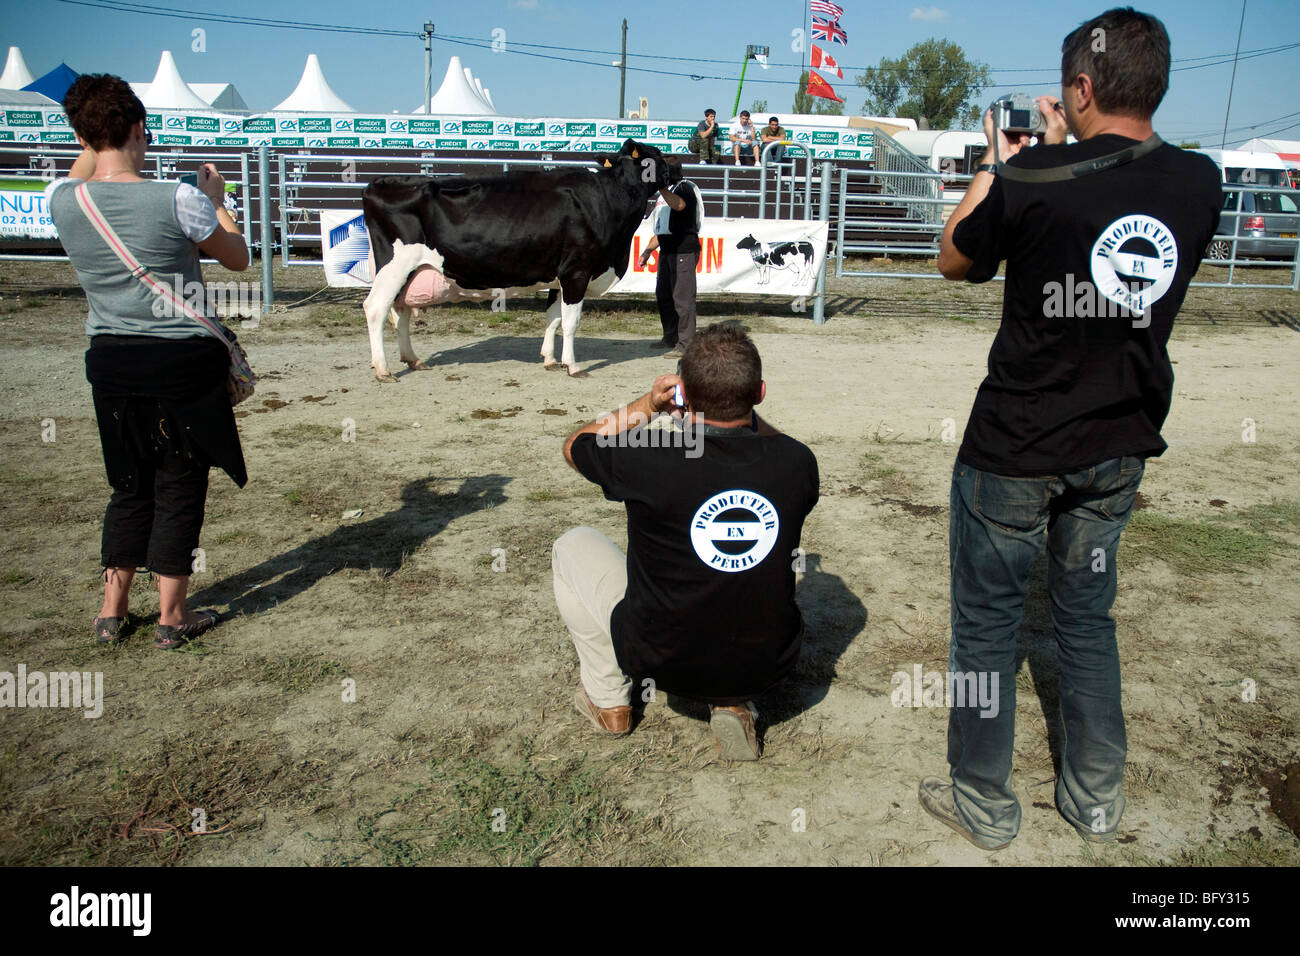 French dairy workers in tee-shirts with a milk trade alarm slogan photograph a prizewinning Holstein cow at a Gascon fair Stock Photo